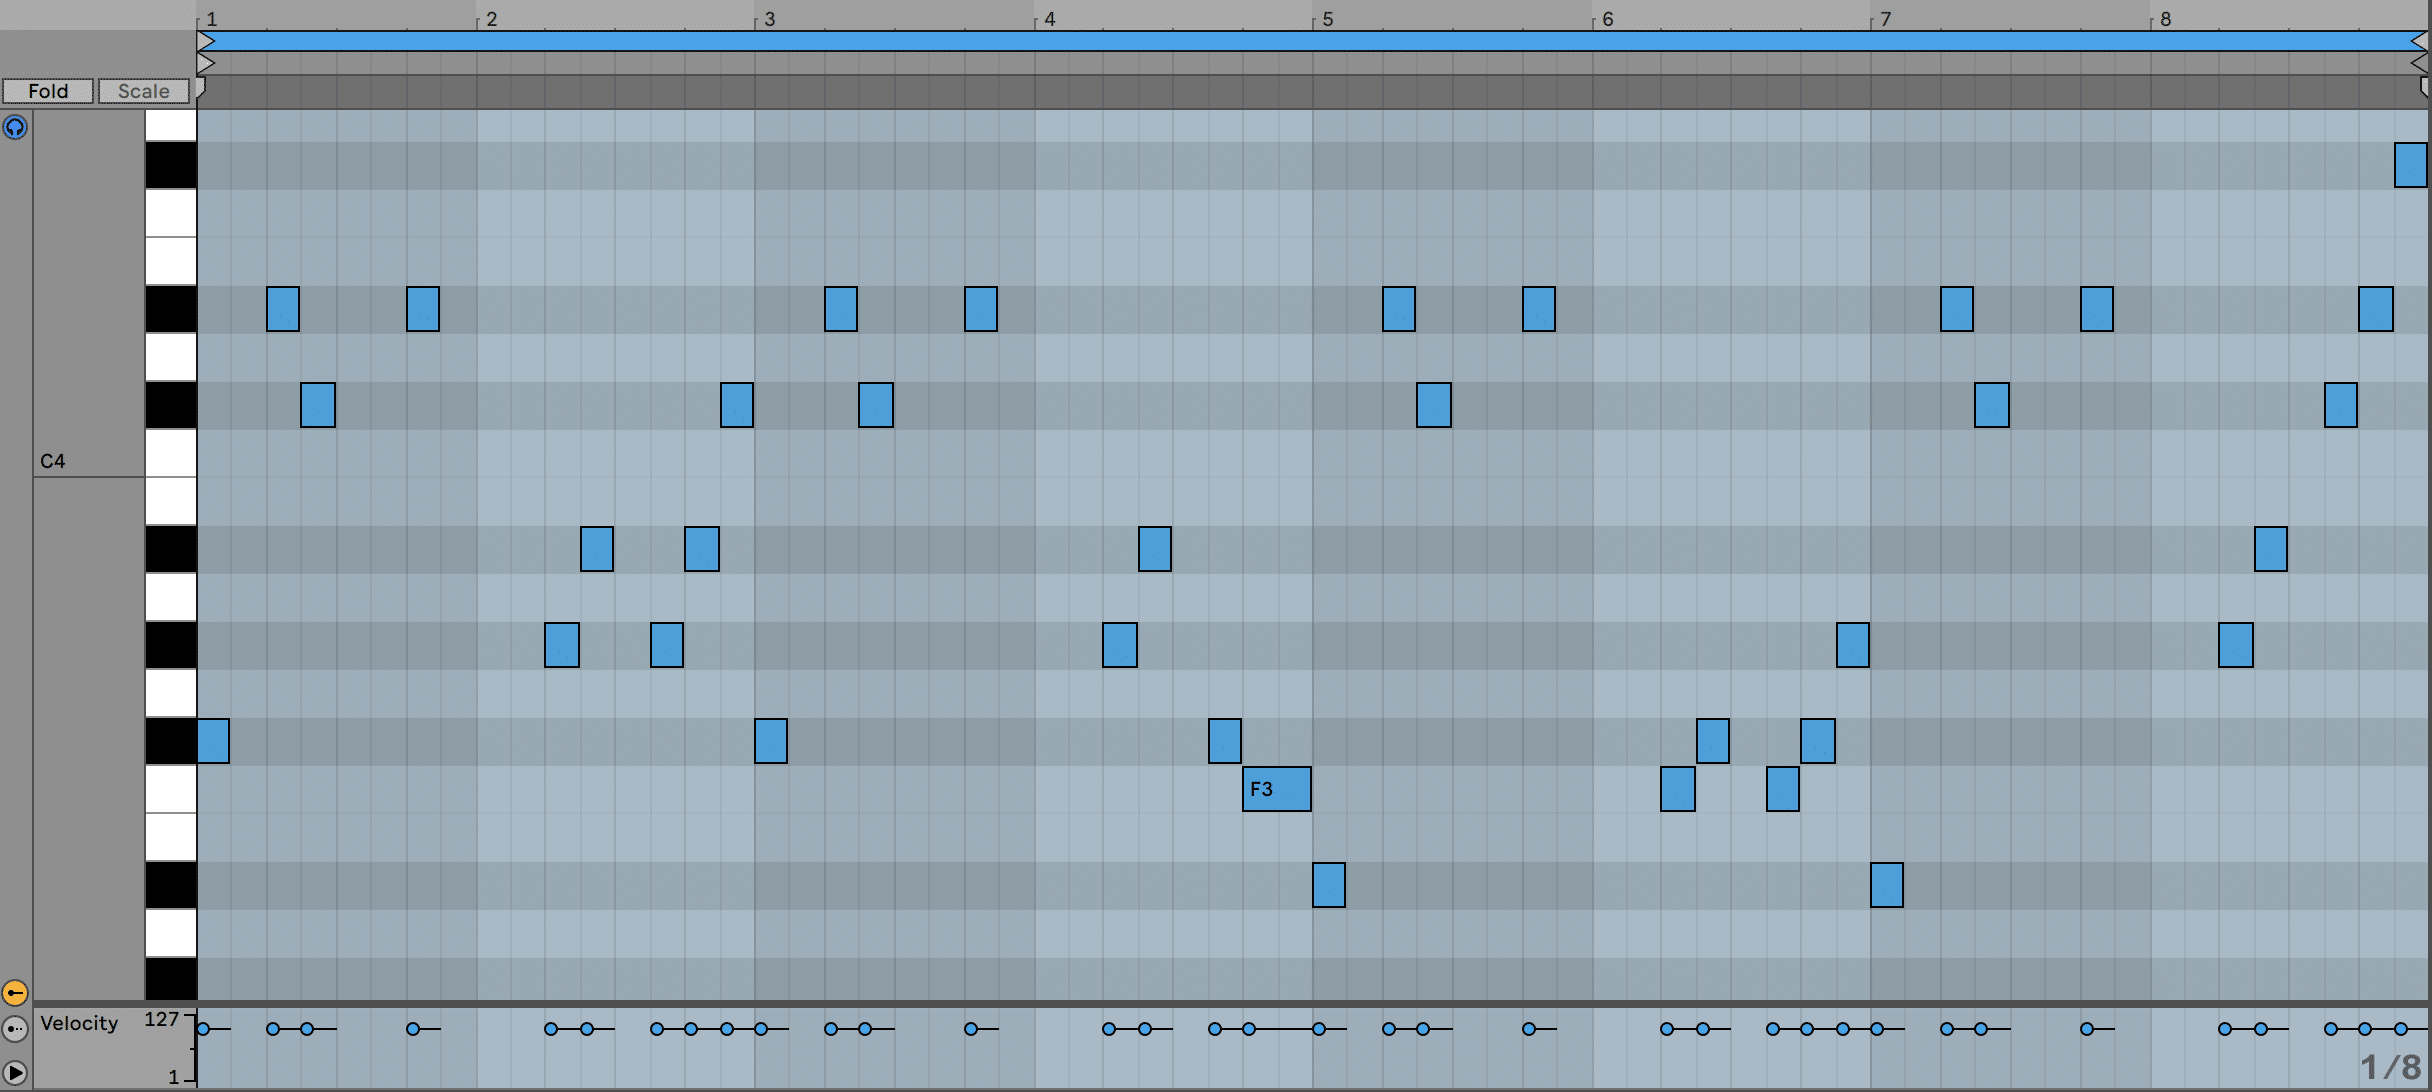 The Ultimate Guide to Writing Melodies (That Are More Memorable)